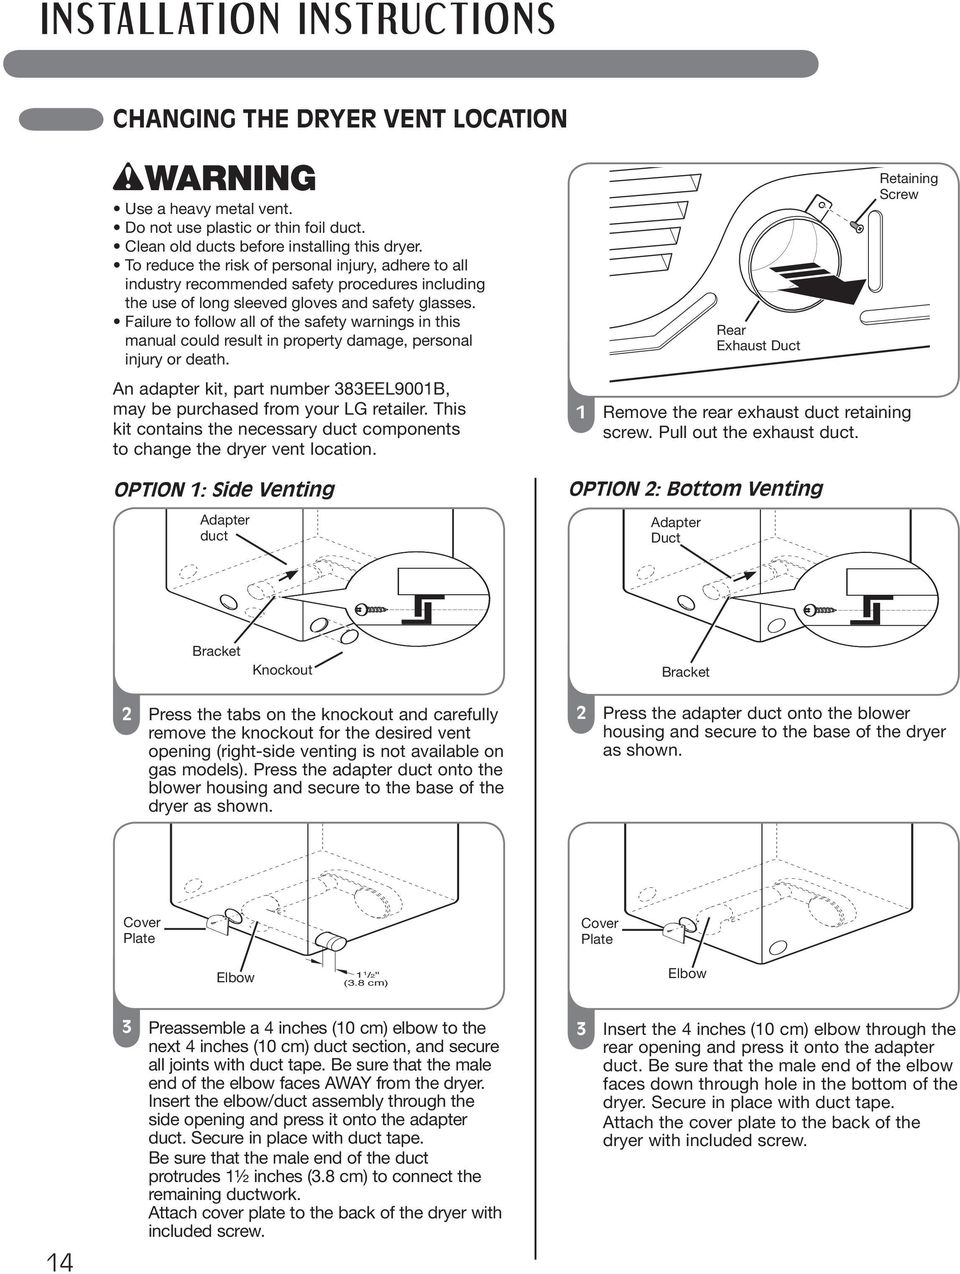 Failure to follow all of the safety warnings in this manual could result in property damage, personal injury or death. An adapter kit, part number 383EEL9001B, may be purchased from your LG retailer.